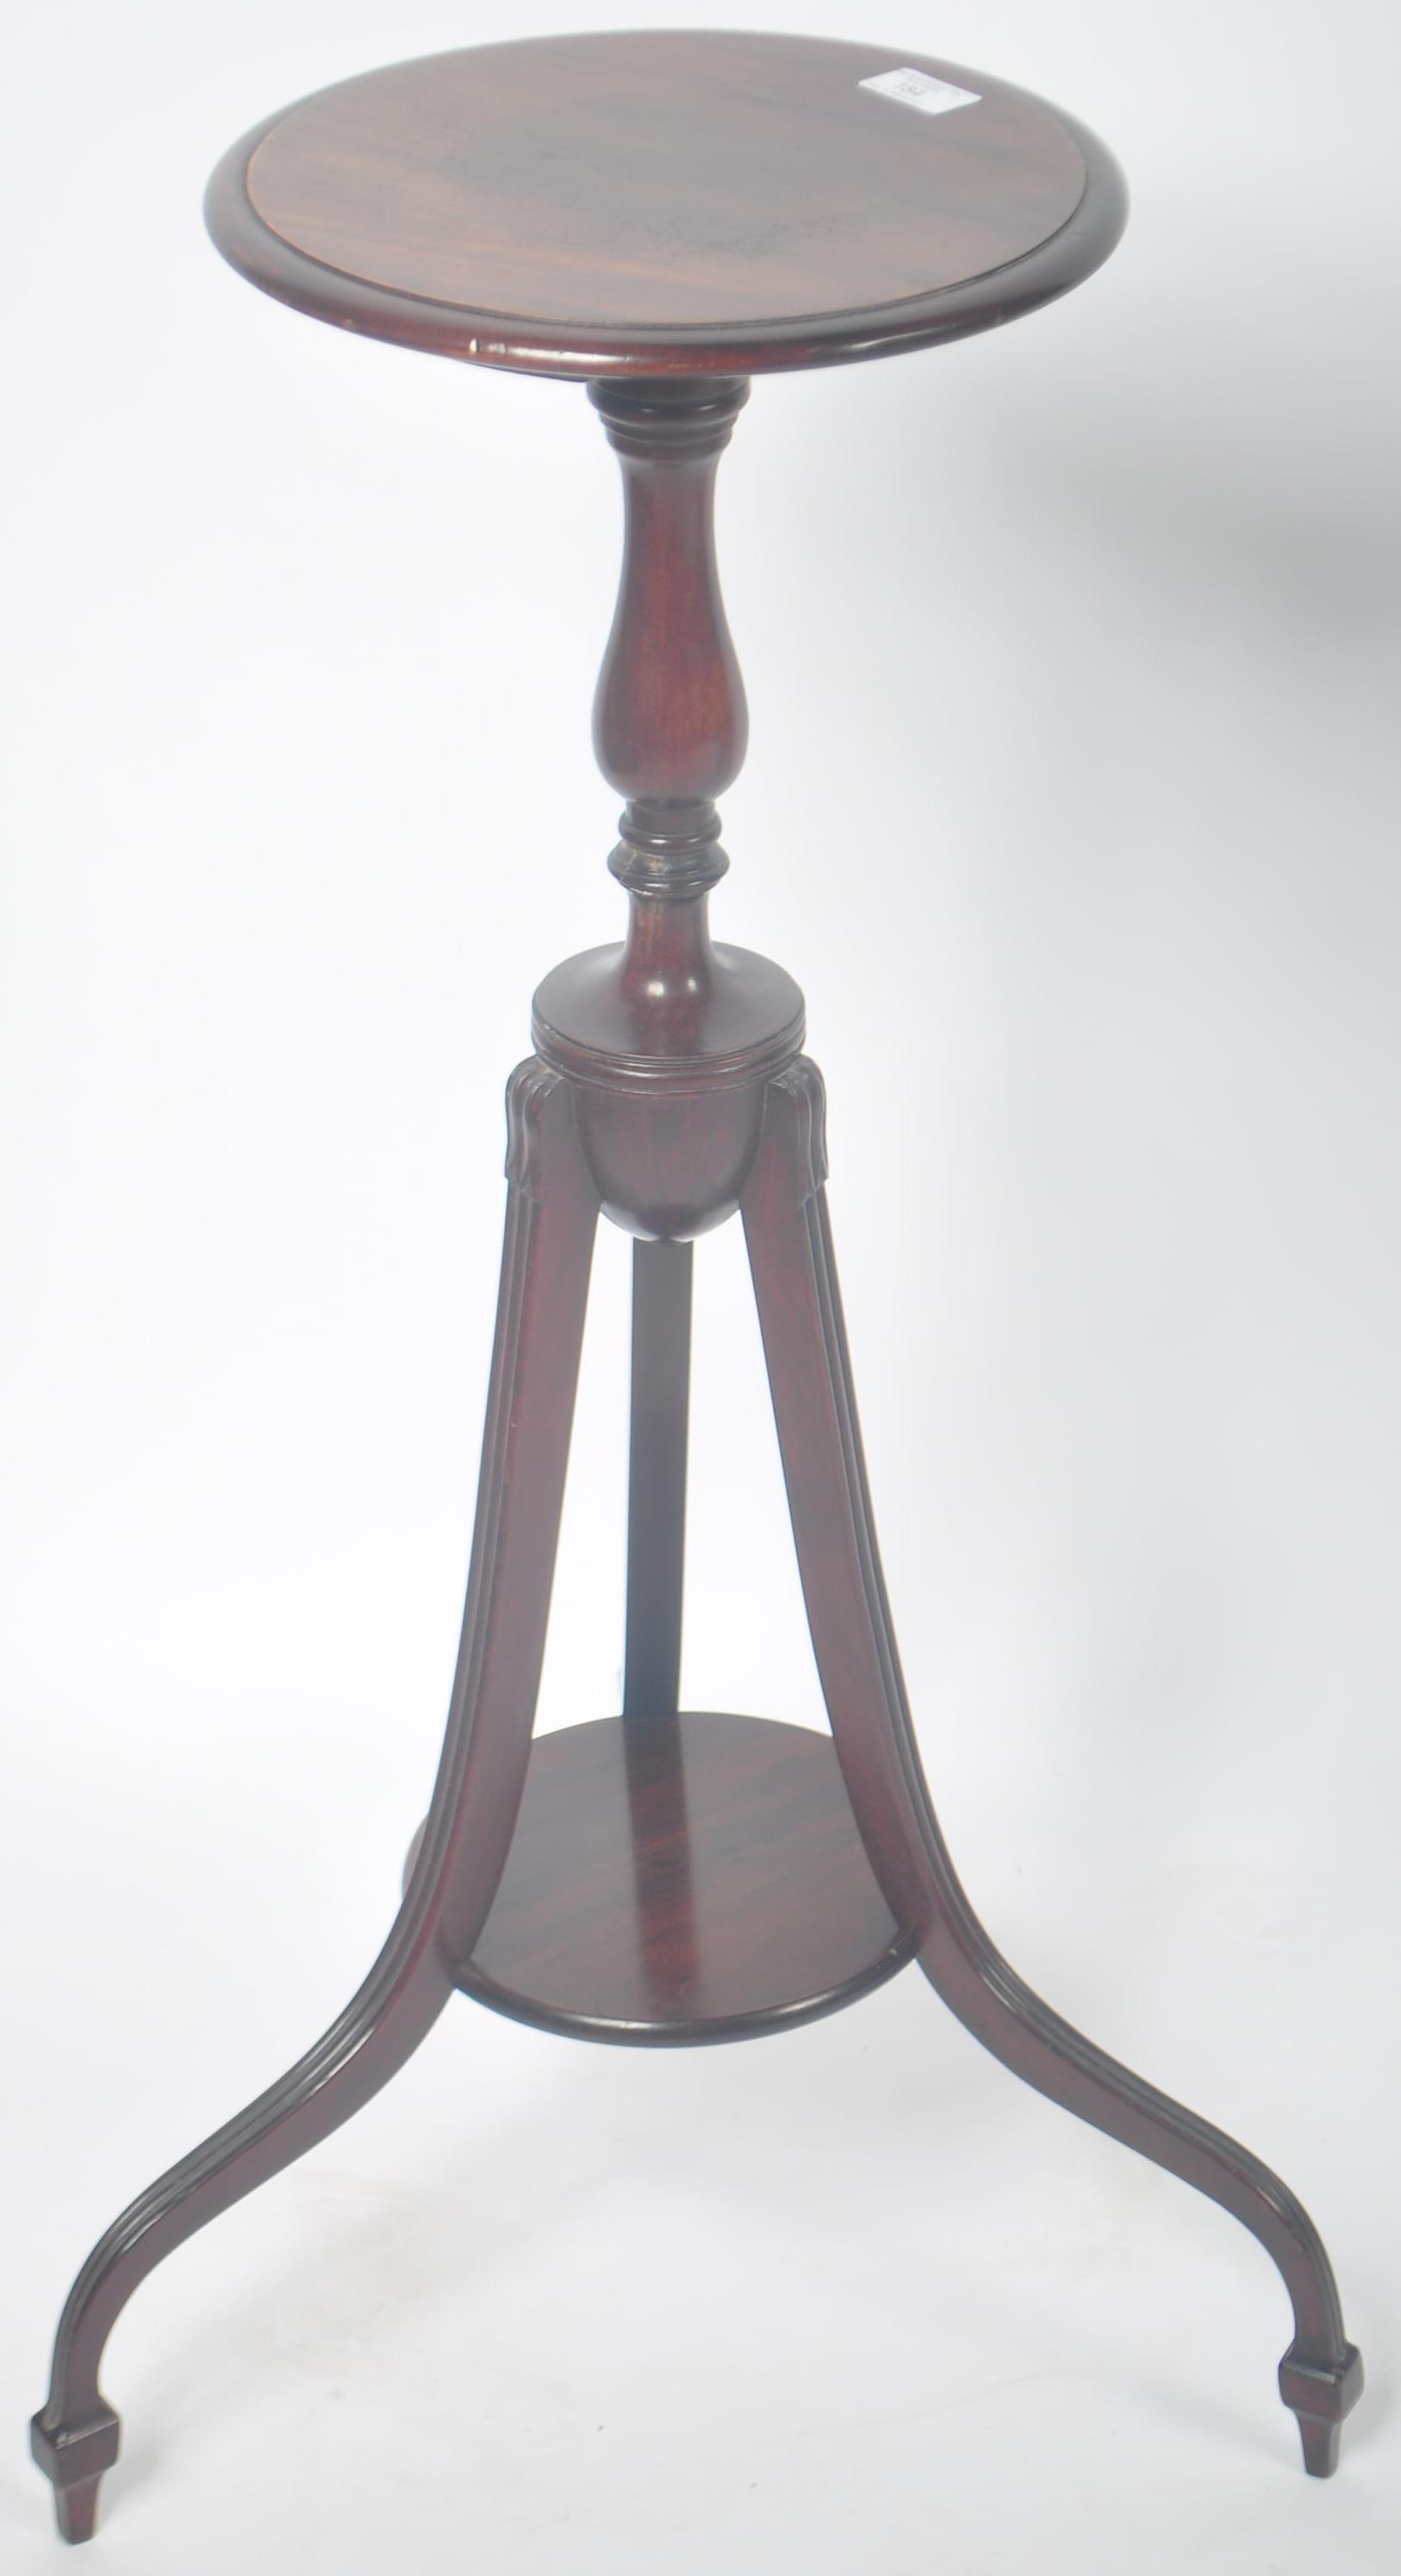 ANTIQUE STYLE MAHOGANY REEDED TRIPOD TORCHERE STAND - Image 2 of 5